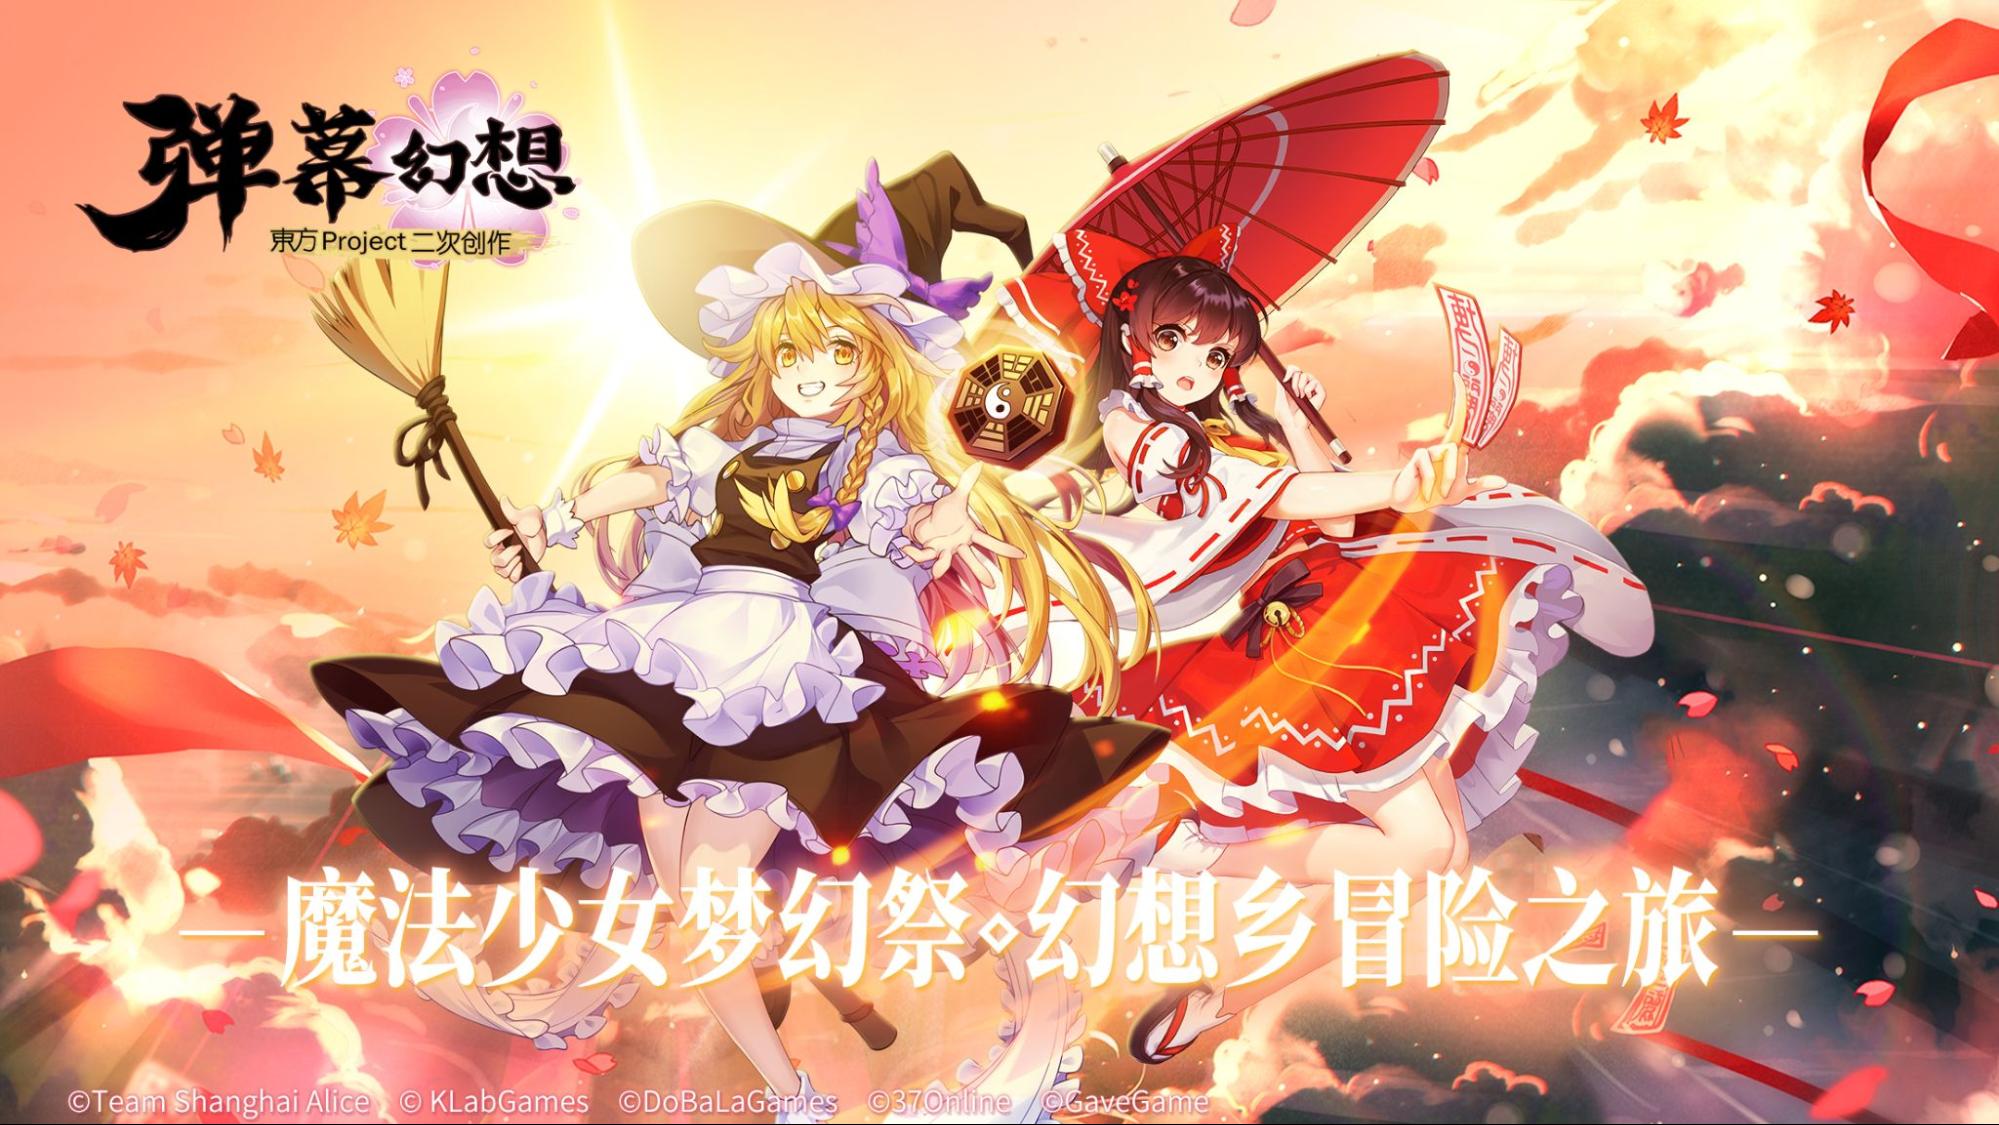 KLab and DoBaLaGames to develop Touhou shoot em up Fangame “Danmaku Genso” for mobile devices